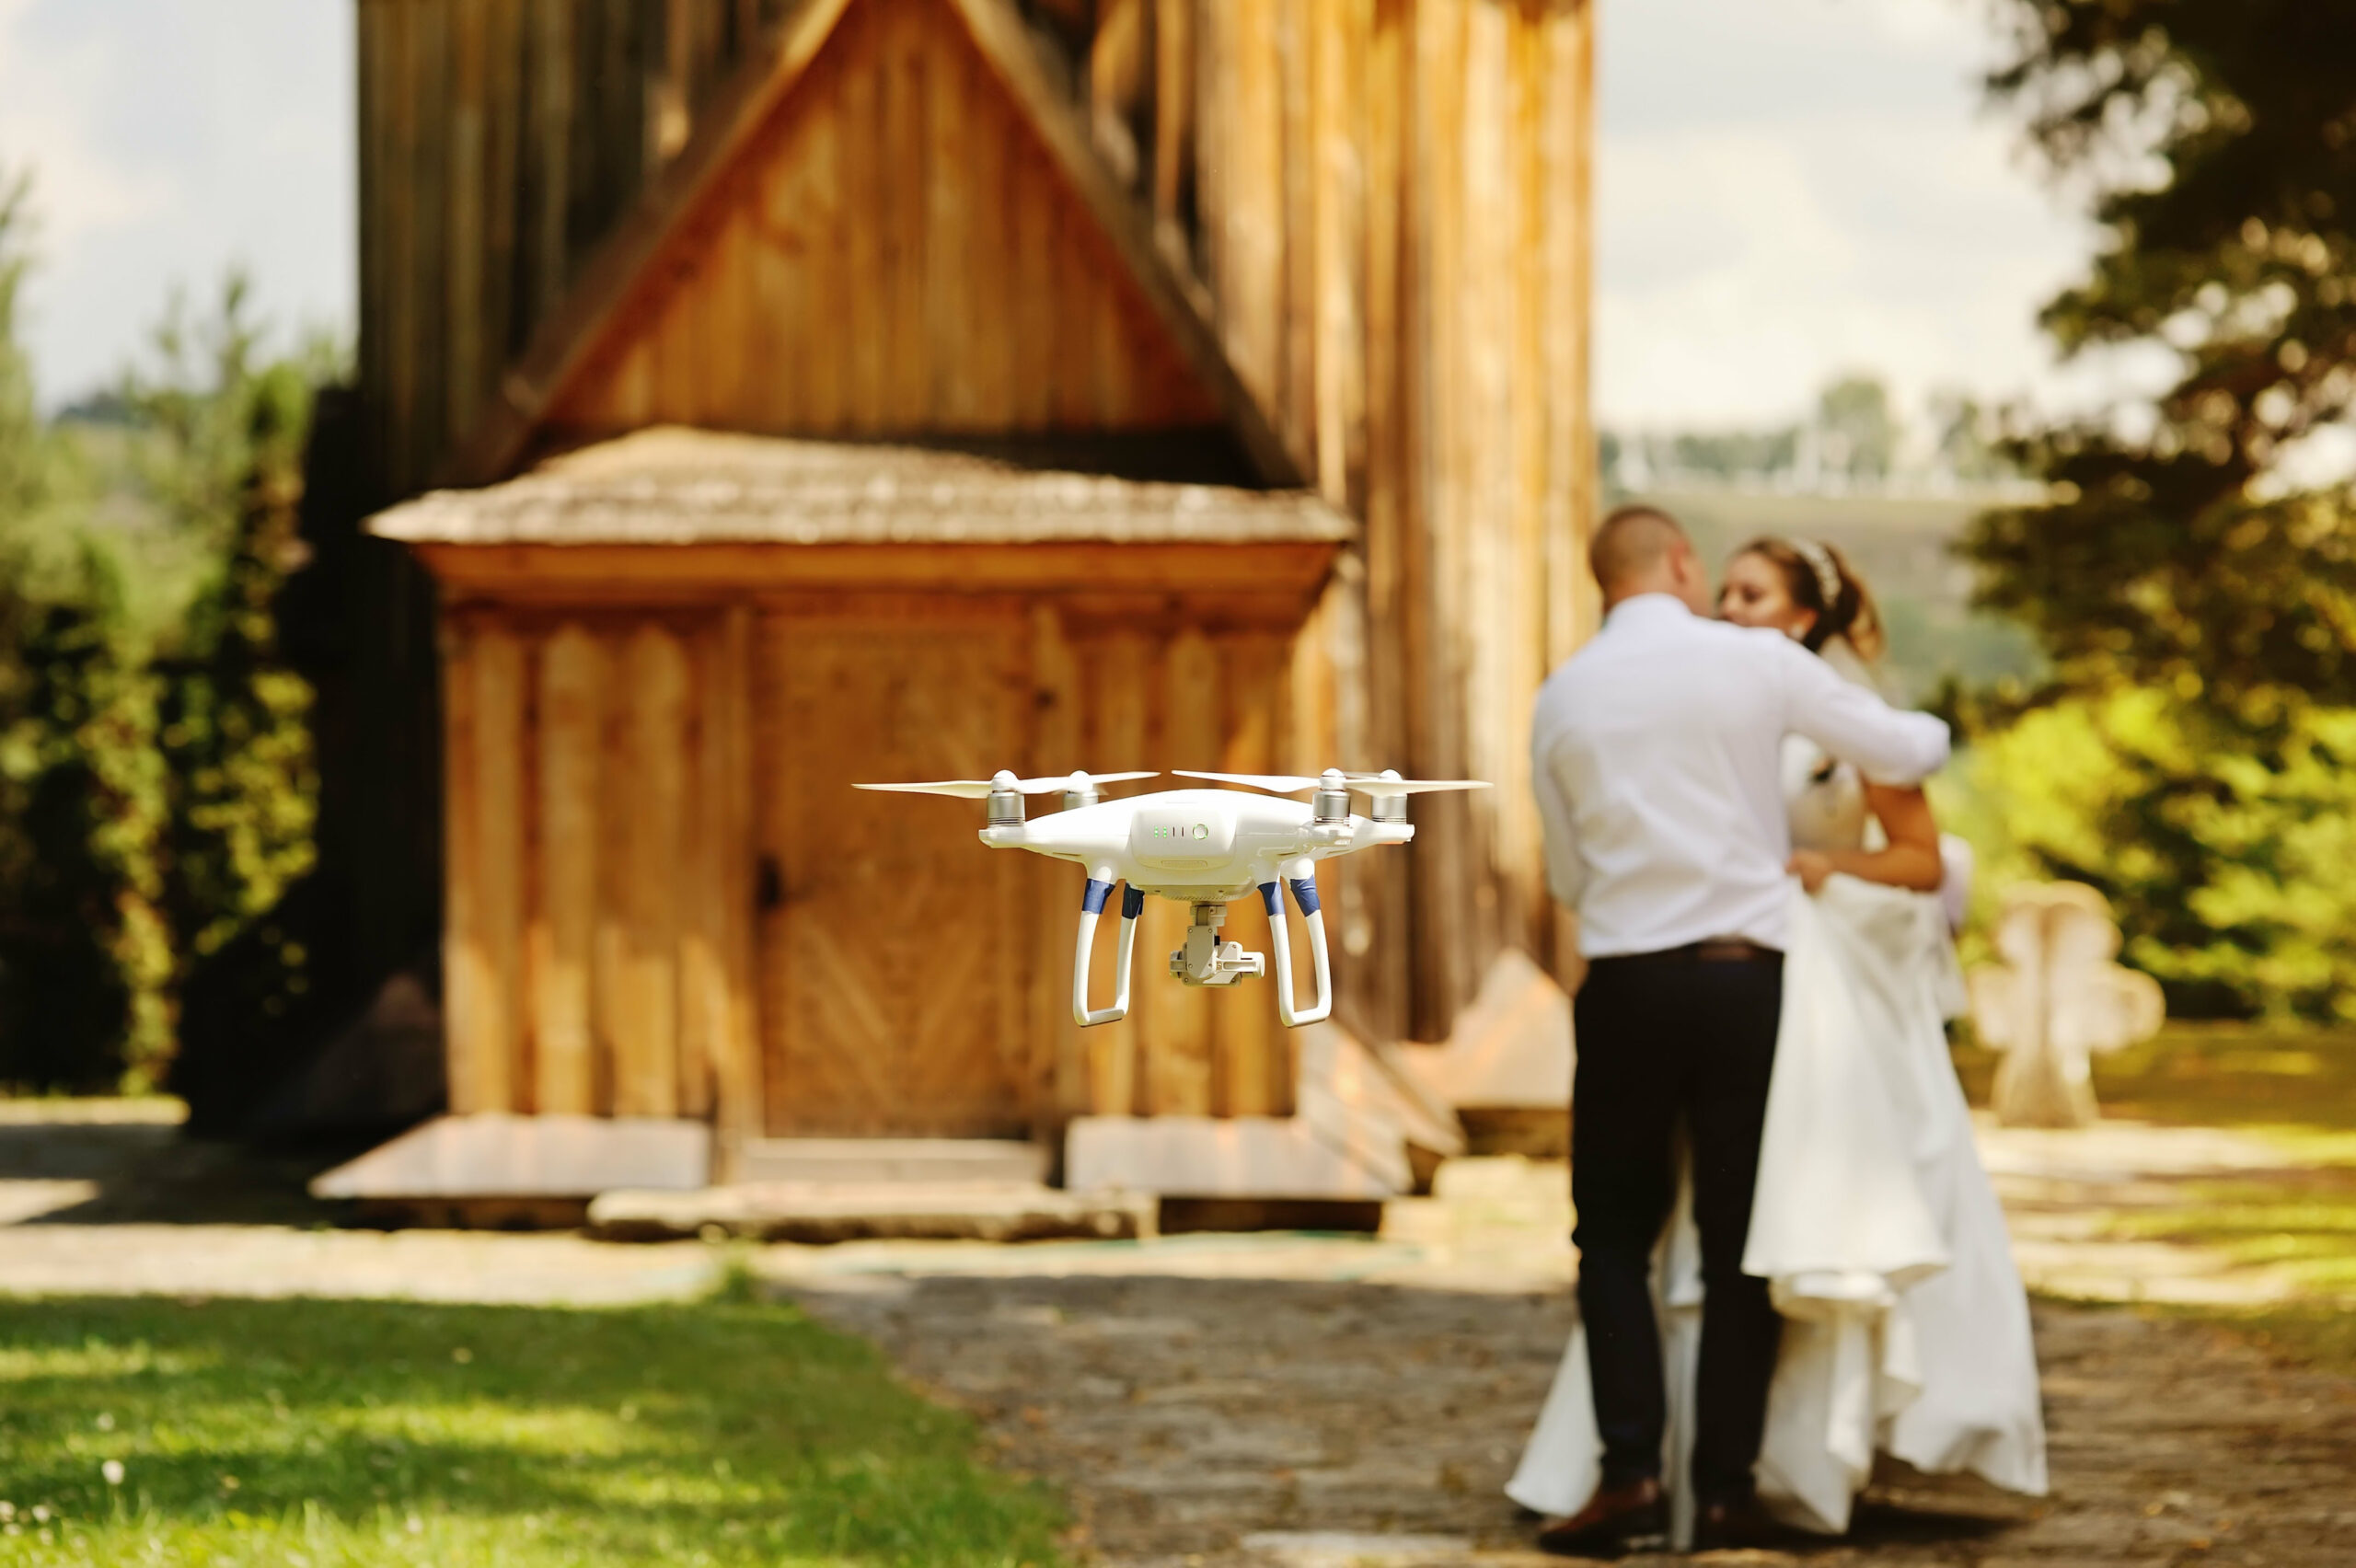 Drone Filming at Wedding